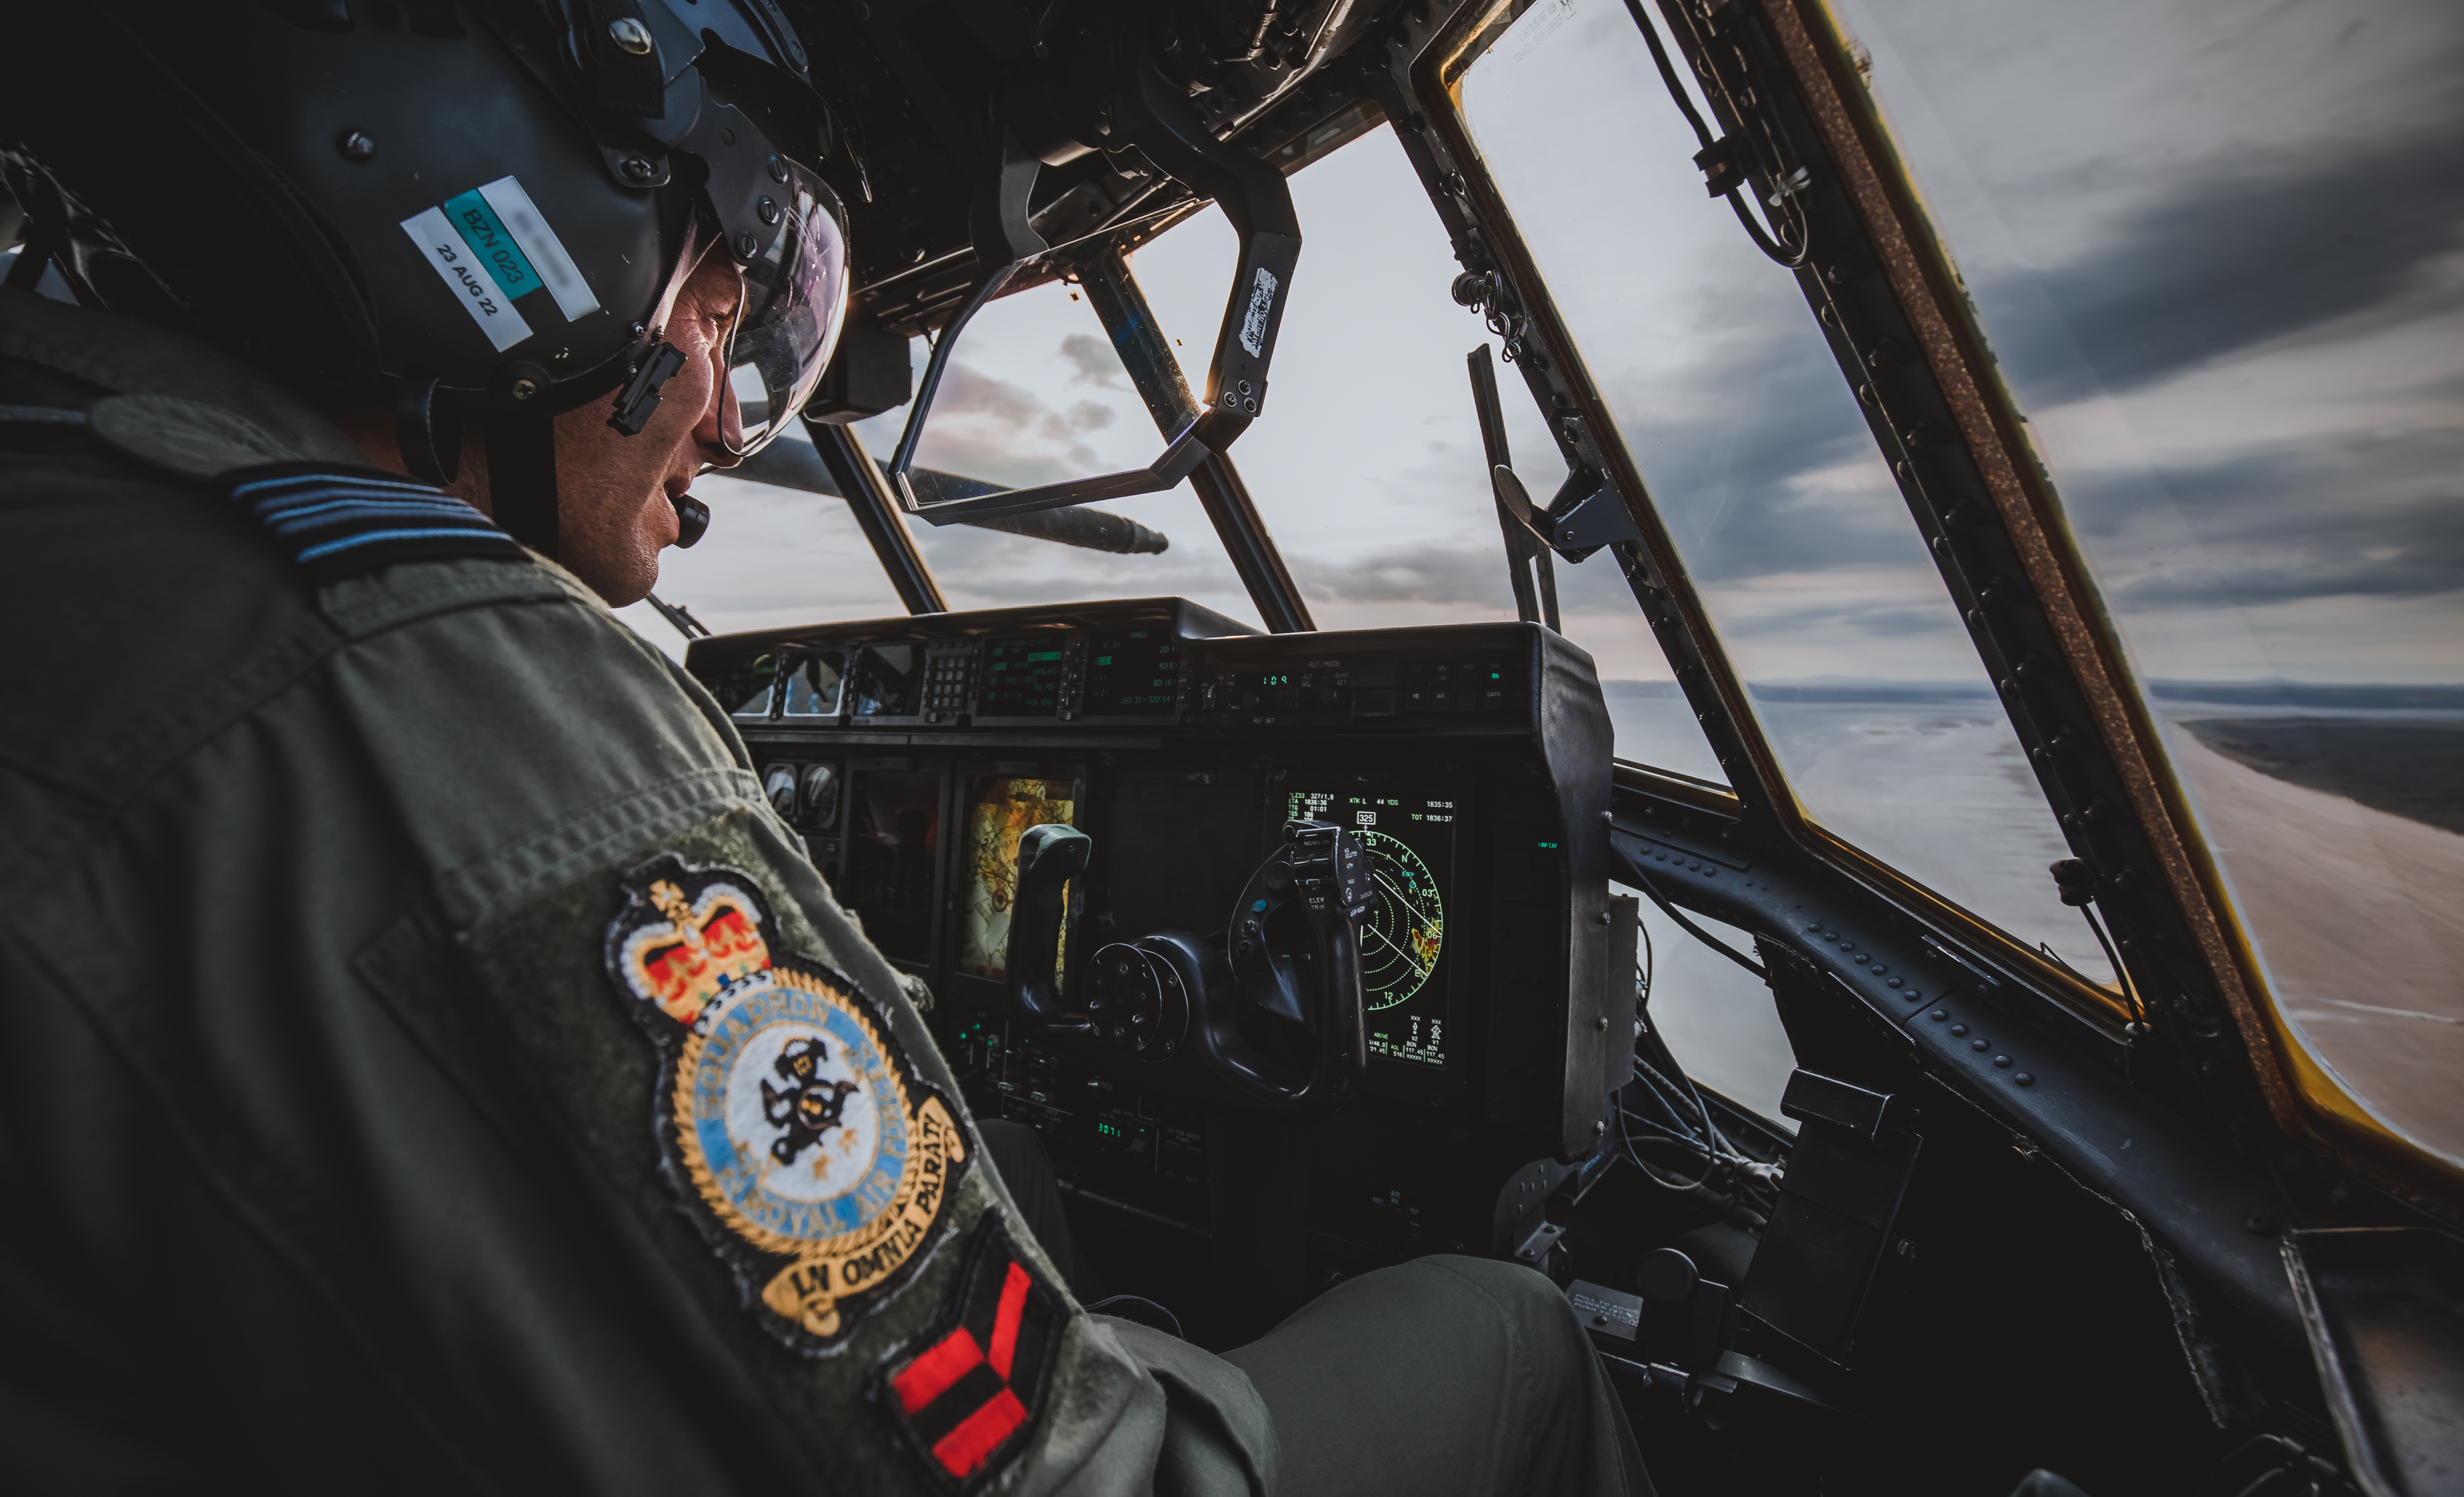 Image shows RAF aviator in the cockpit of the Hercules aircraft.